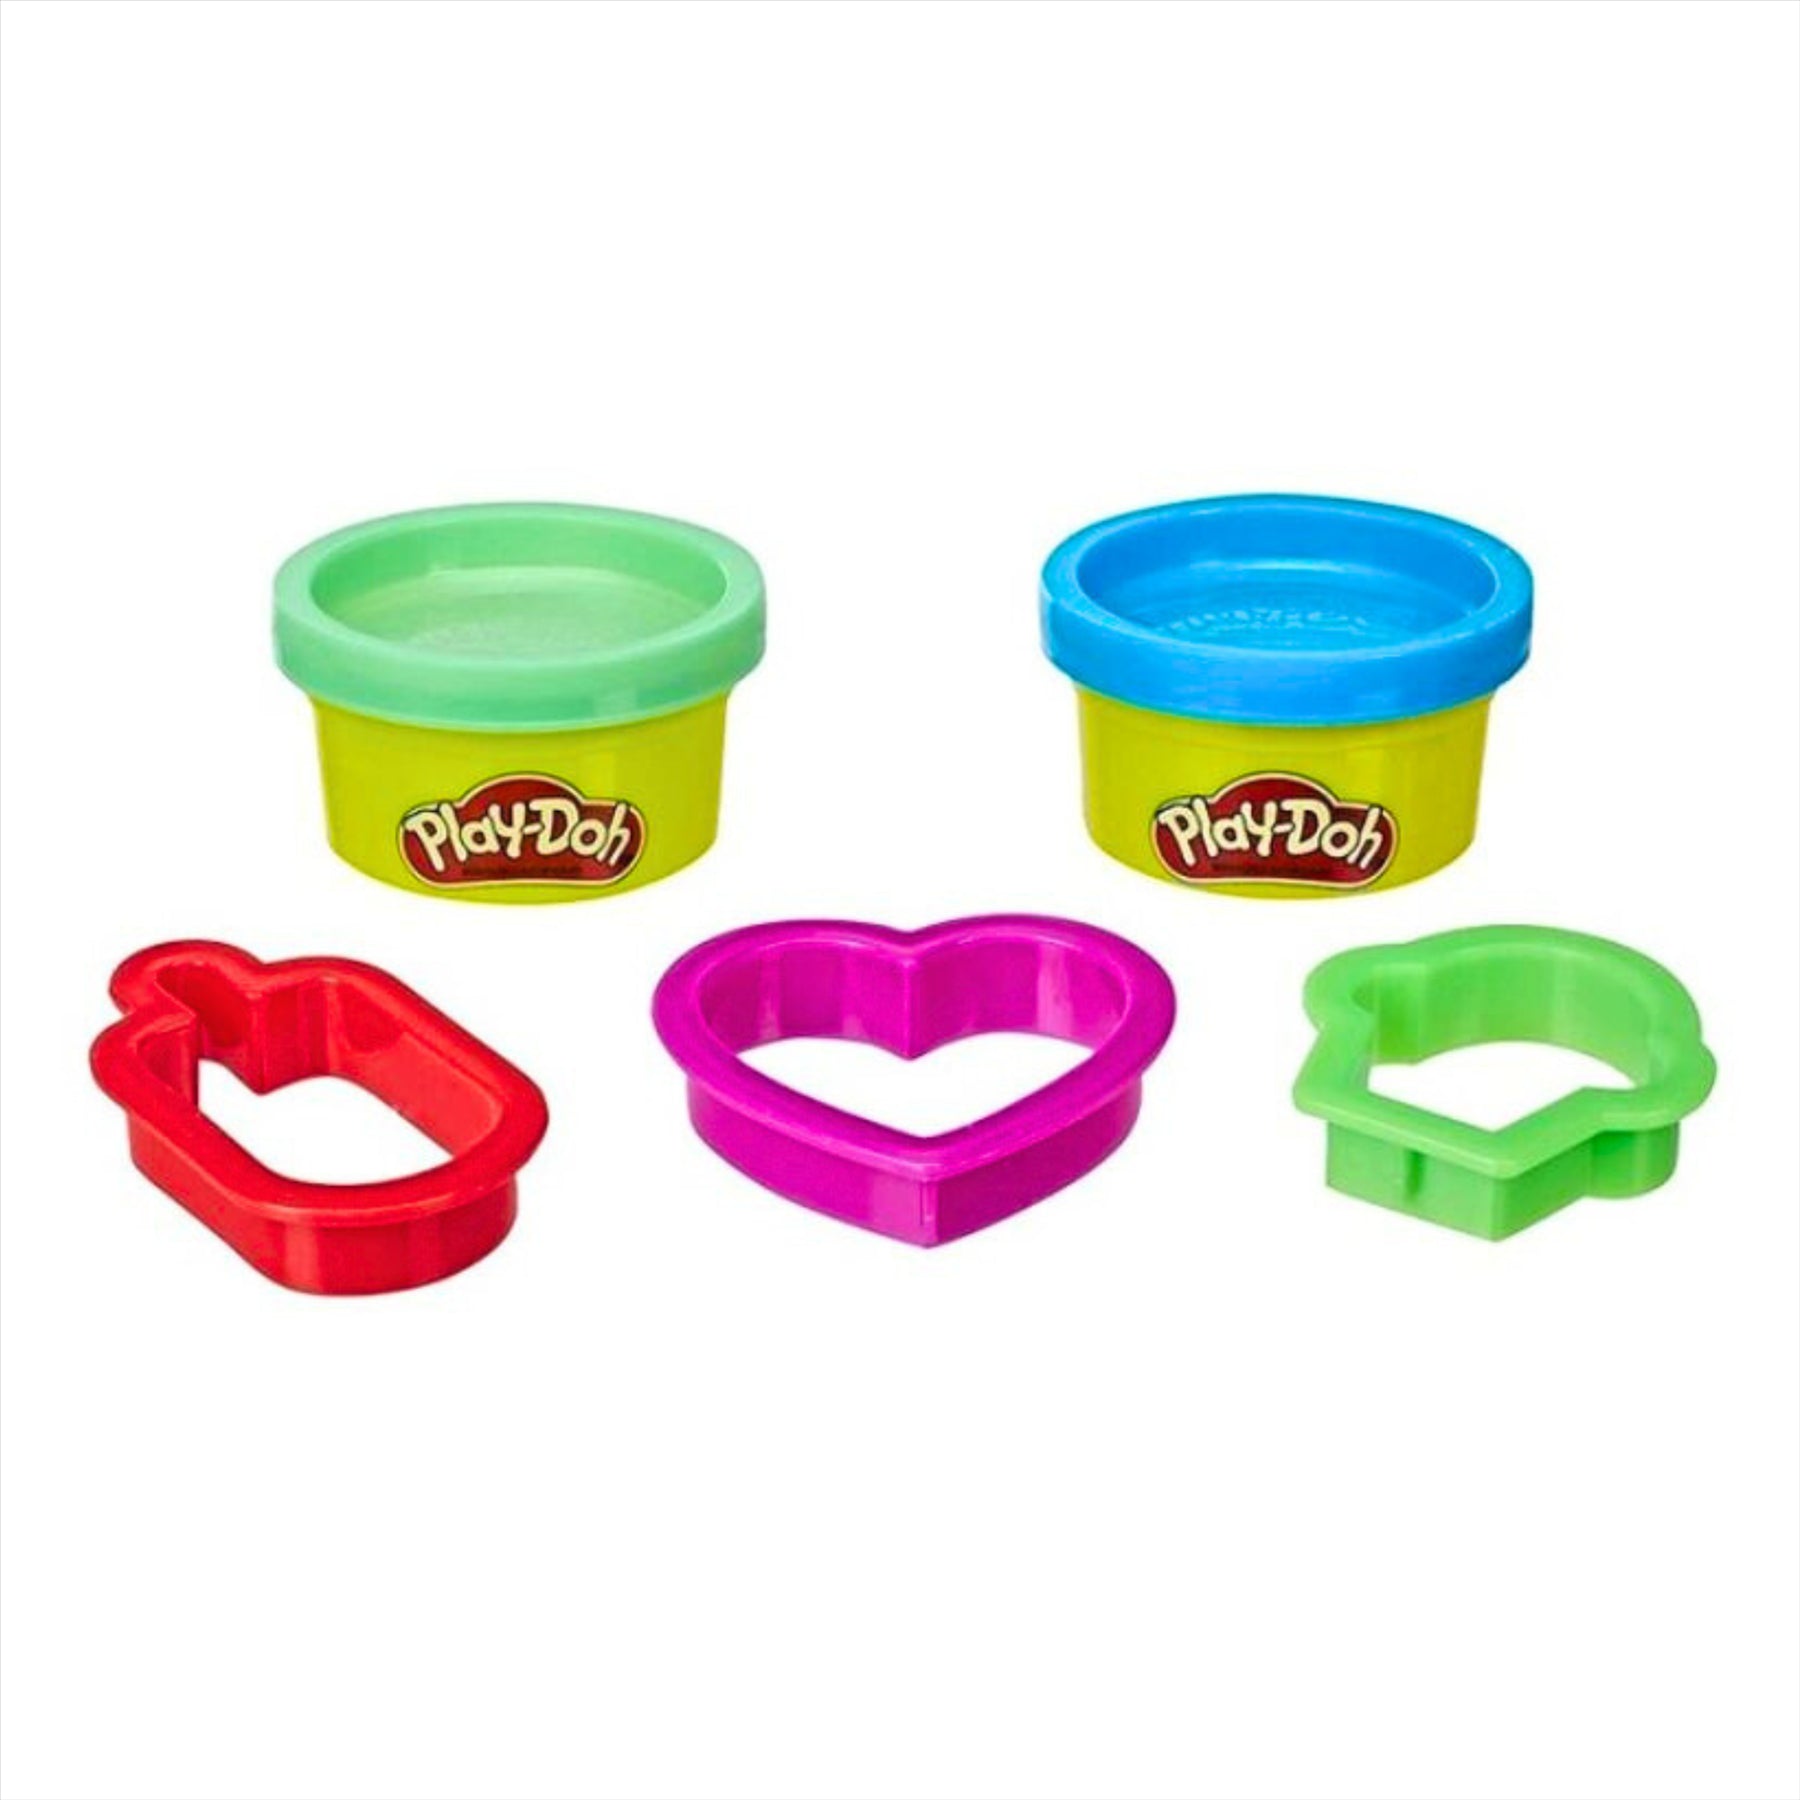 Play-Doh: Sweet Shapes - Shape Cutter Set Including 2 Pots of Play-Doh - Toptoys2u